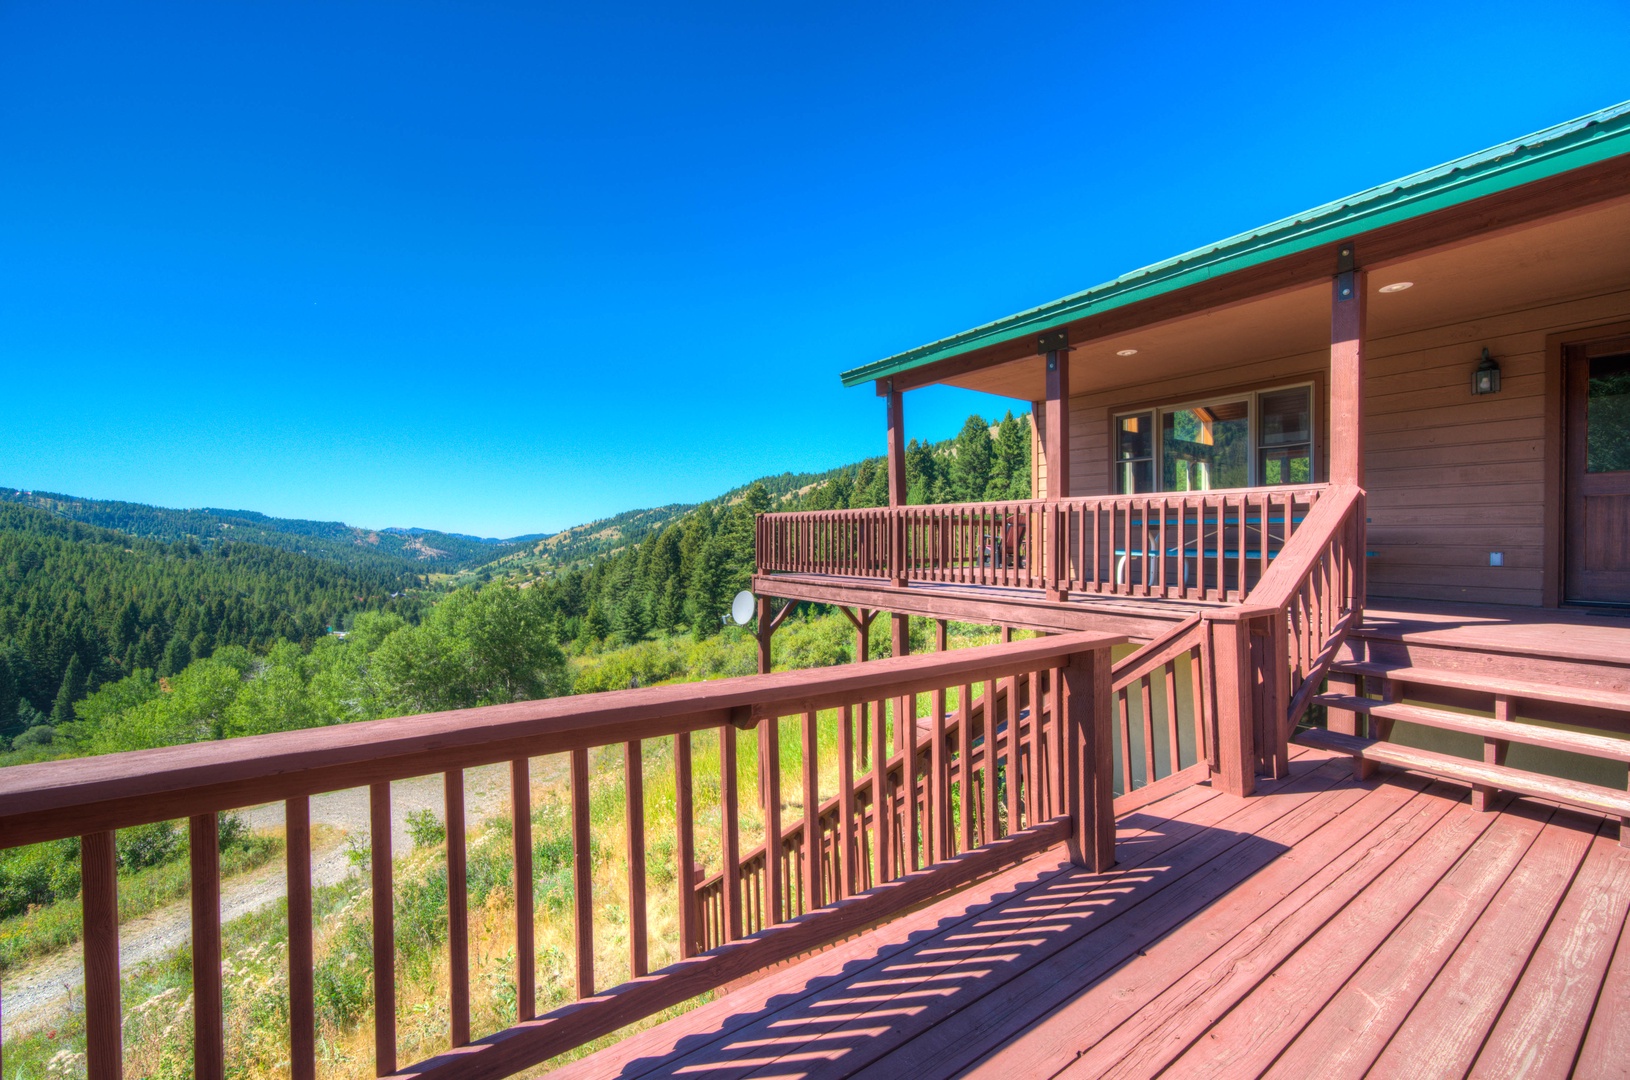 Bozeman Vacation Rentals, The Canyon Lookout - Sweeping Canyon Views from Wraparound Decks